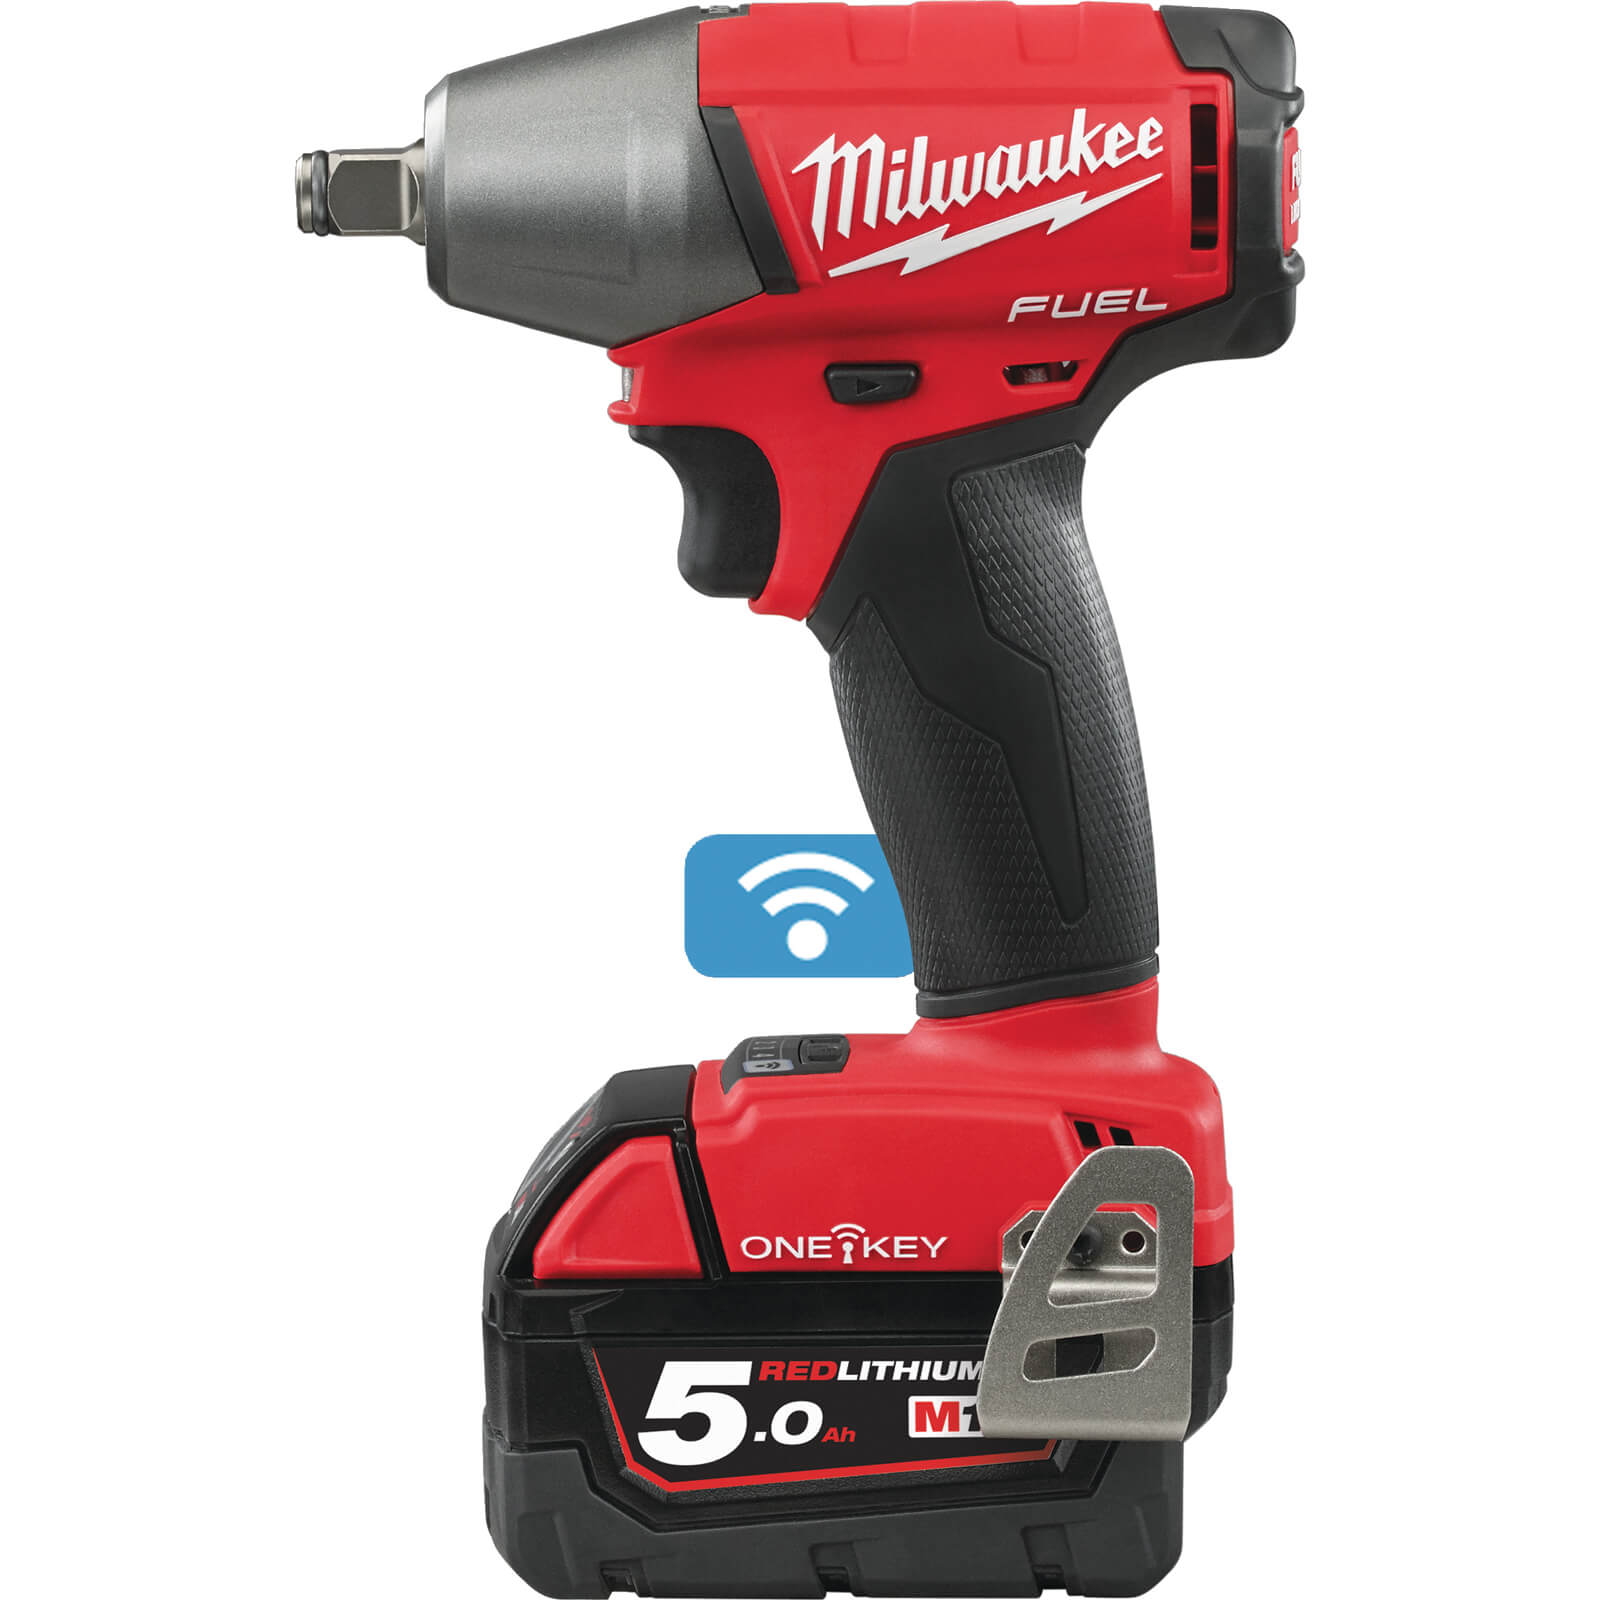 Milwaukee M18 ONEIWF12 Fuel 18v Cordless Brushless 1/2" Drive Impact Wrench 2 x 5ah Li-ion Charger Case